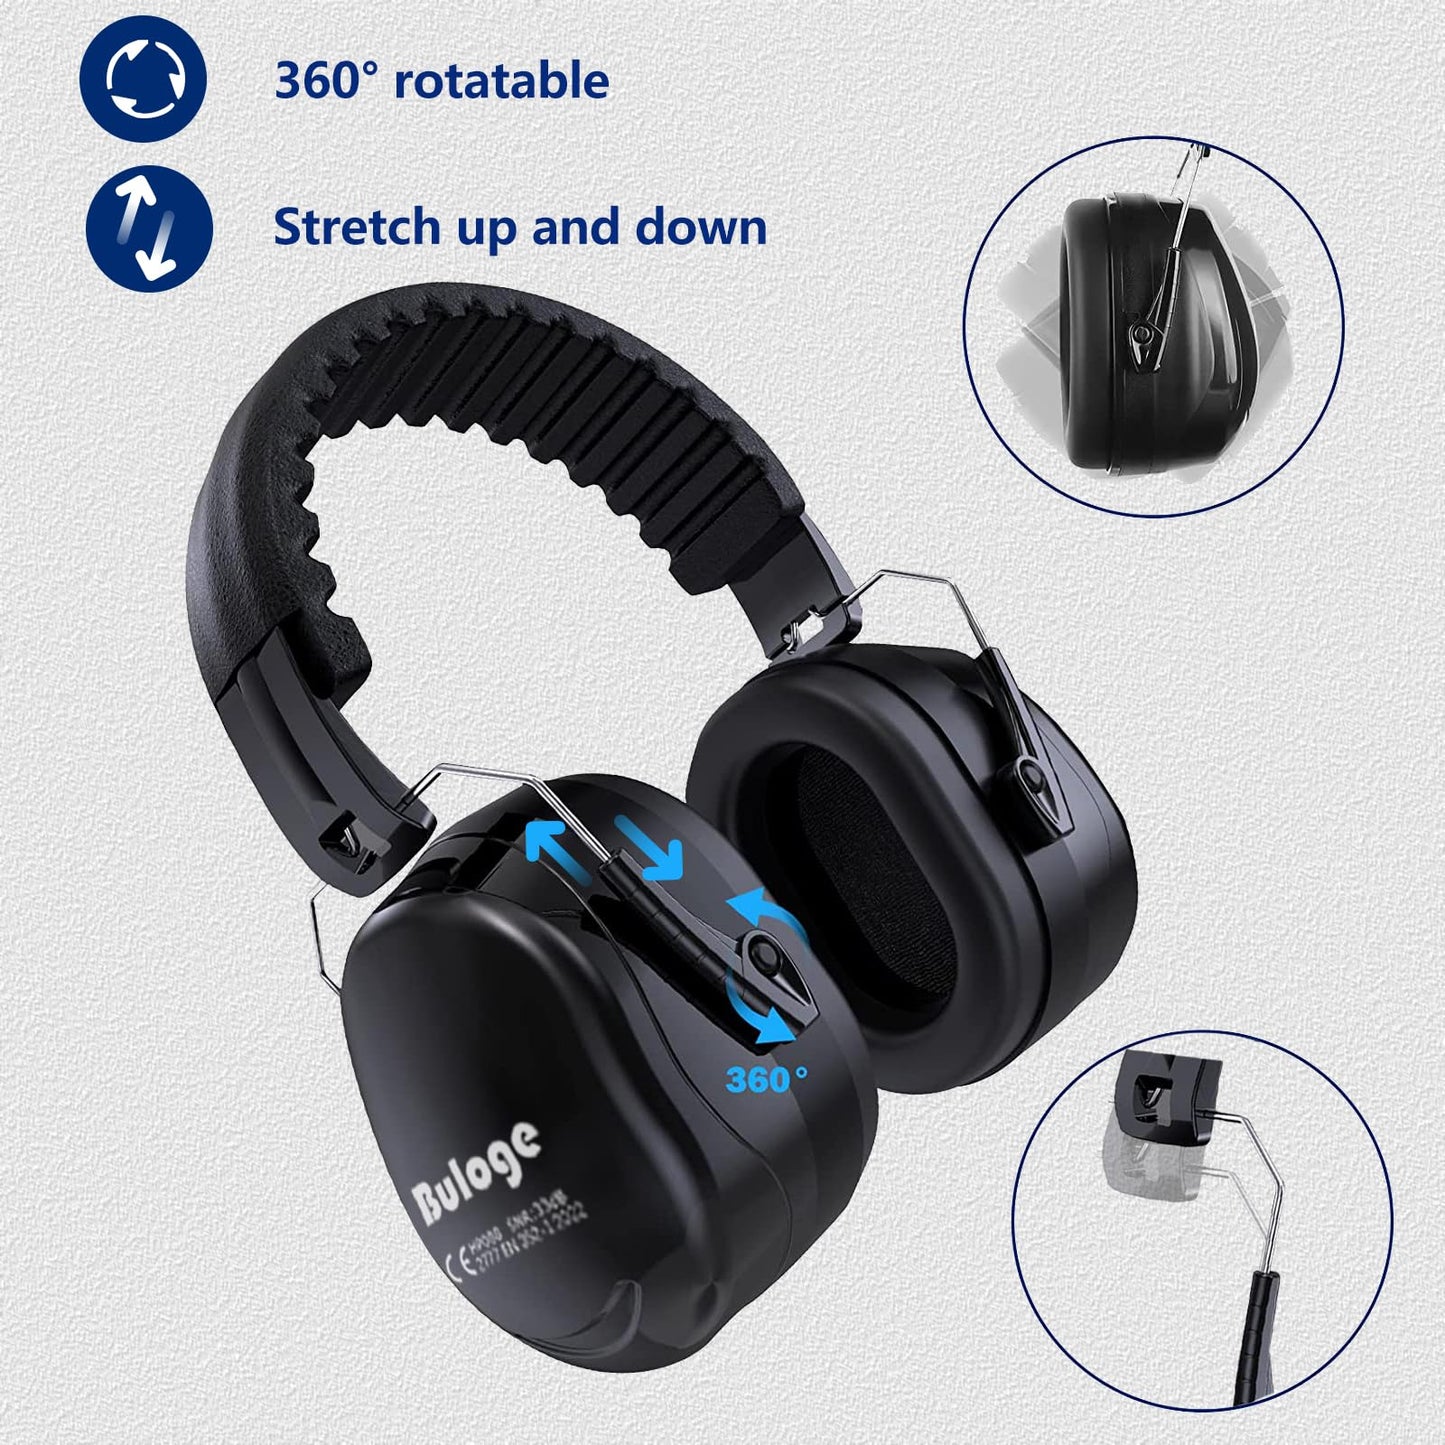 Ear Protection for Shooting, Noise Cancelling Headphones Autism, NRR 26dB Noise Sound Protection Headphonesfor Shooting Gun Range Mowing Construction